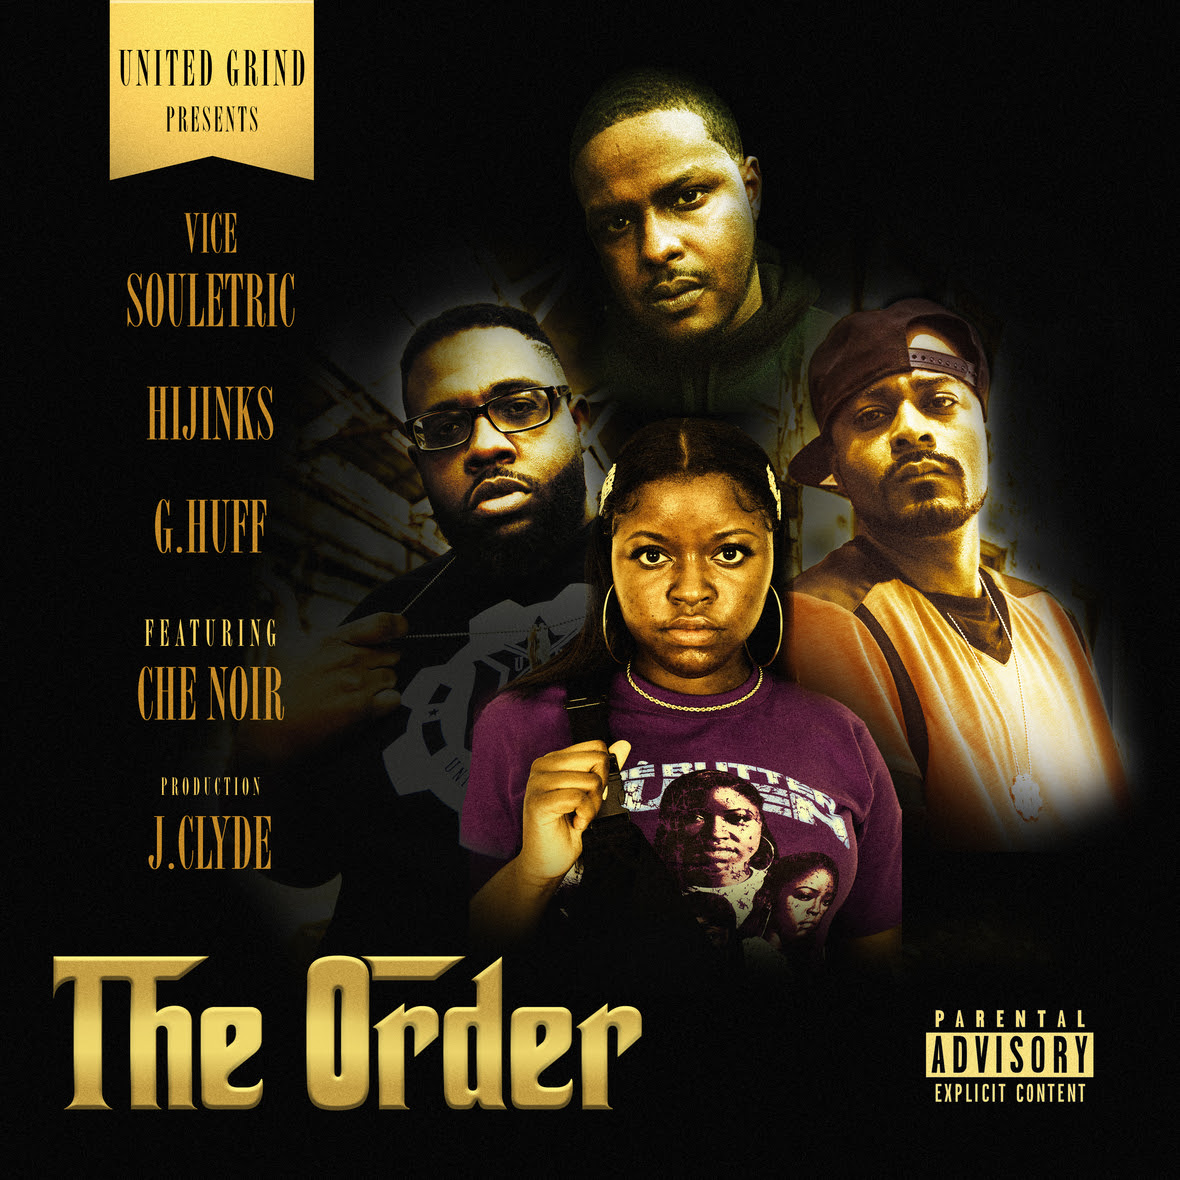 United Grind – “The Order” (Vice Souletric, HiJinks, G.Huff feat. Che Noir)  [Prod. J.Clyde] | Video @unitedgrind @vice_souletric @MosHiJinks @GHuff330  @che_noir – 1stDayFresh.com